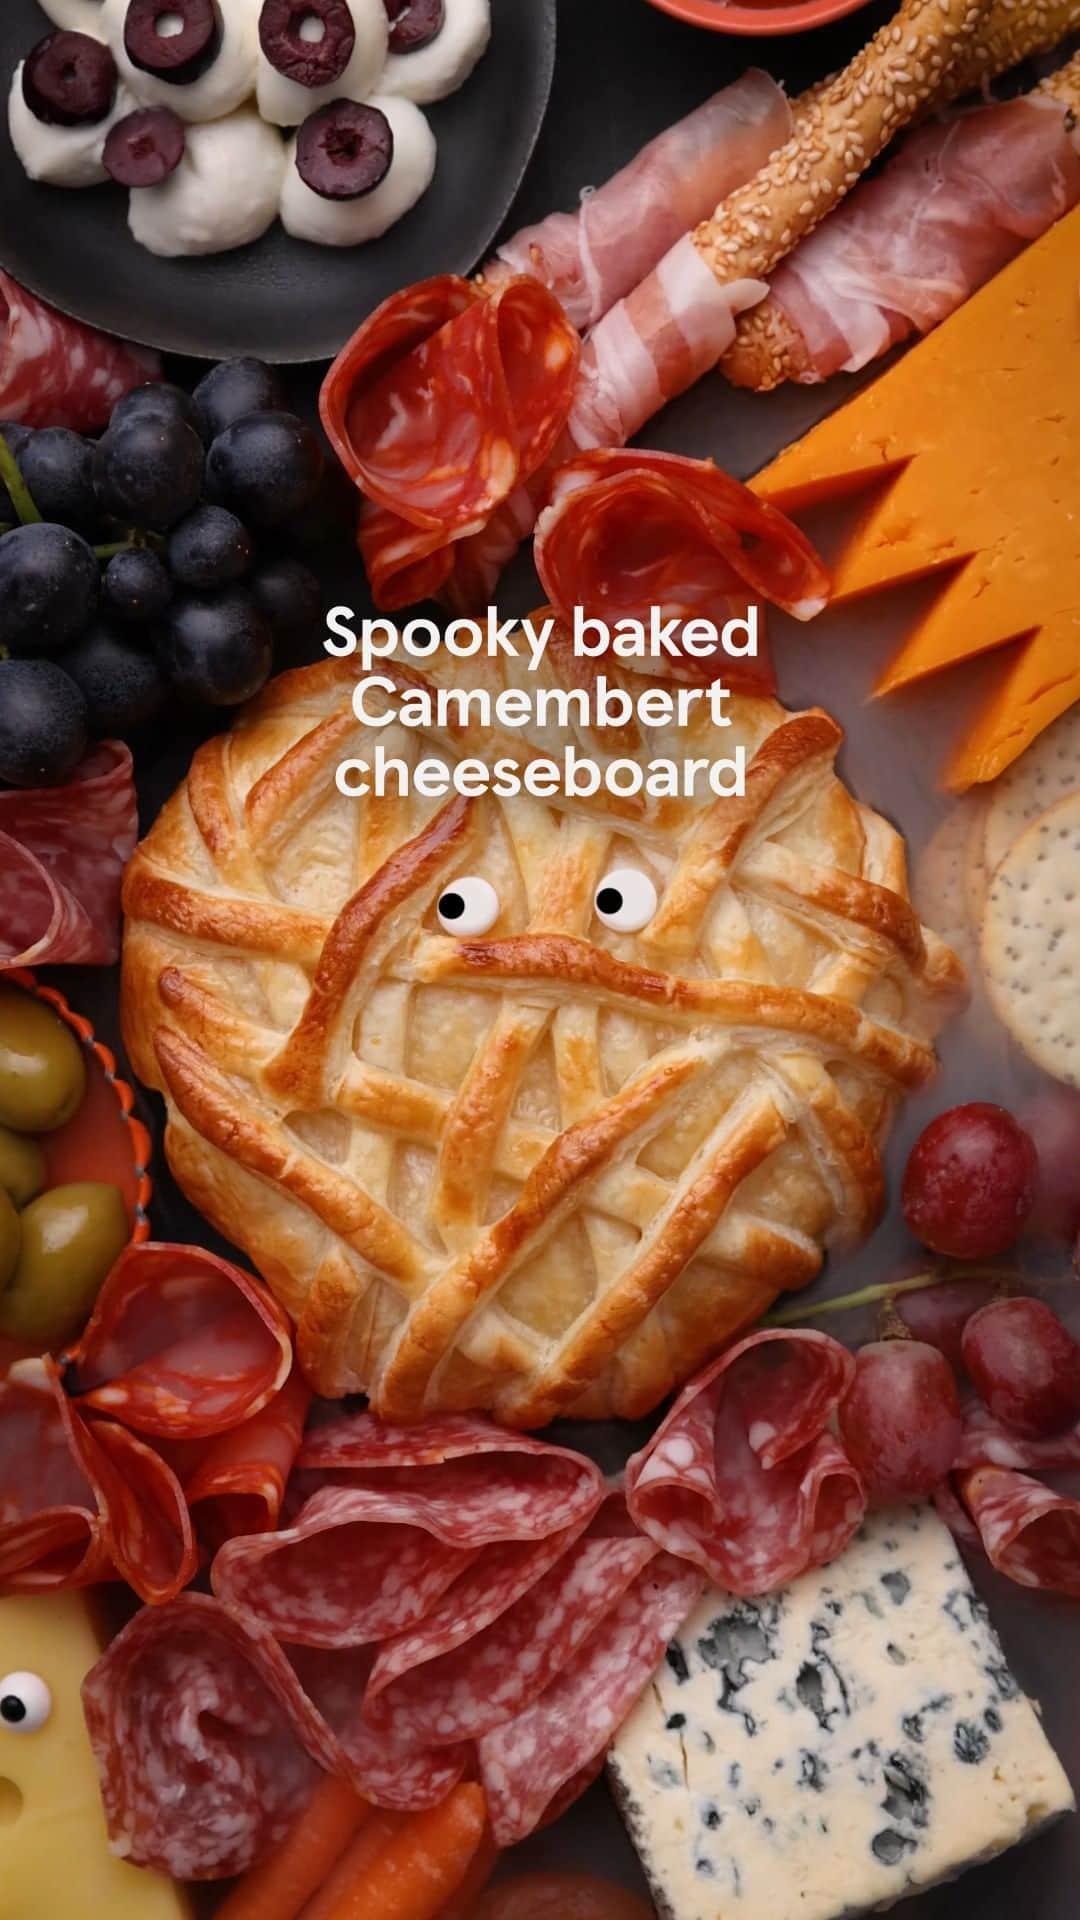 Tesco Food Officialのインスタグラム：「Give your cheeseboard a scary twist with this pastry baked camembert 🎃 Serve with zom-brie and ‘boo’ cheese for a Halloween feast. Head to the link in bio for the recipe - if you dare!」